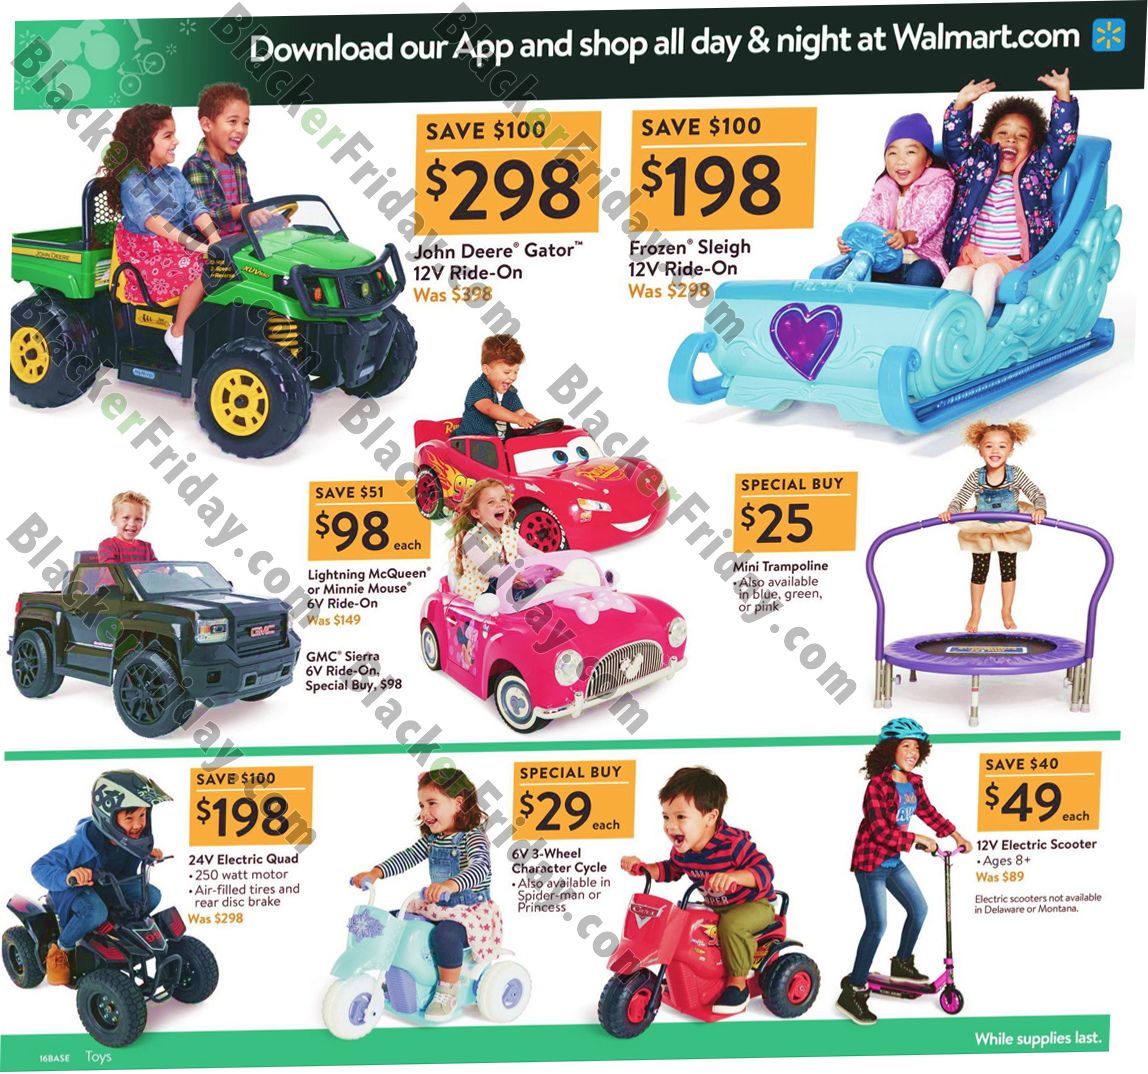 cyber monday 2018 toy deals